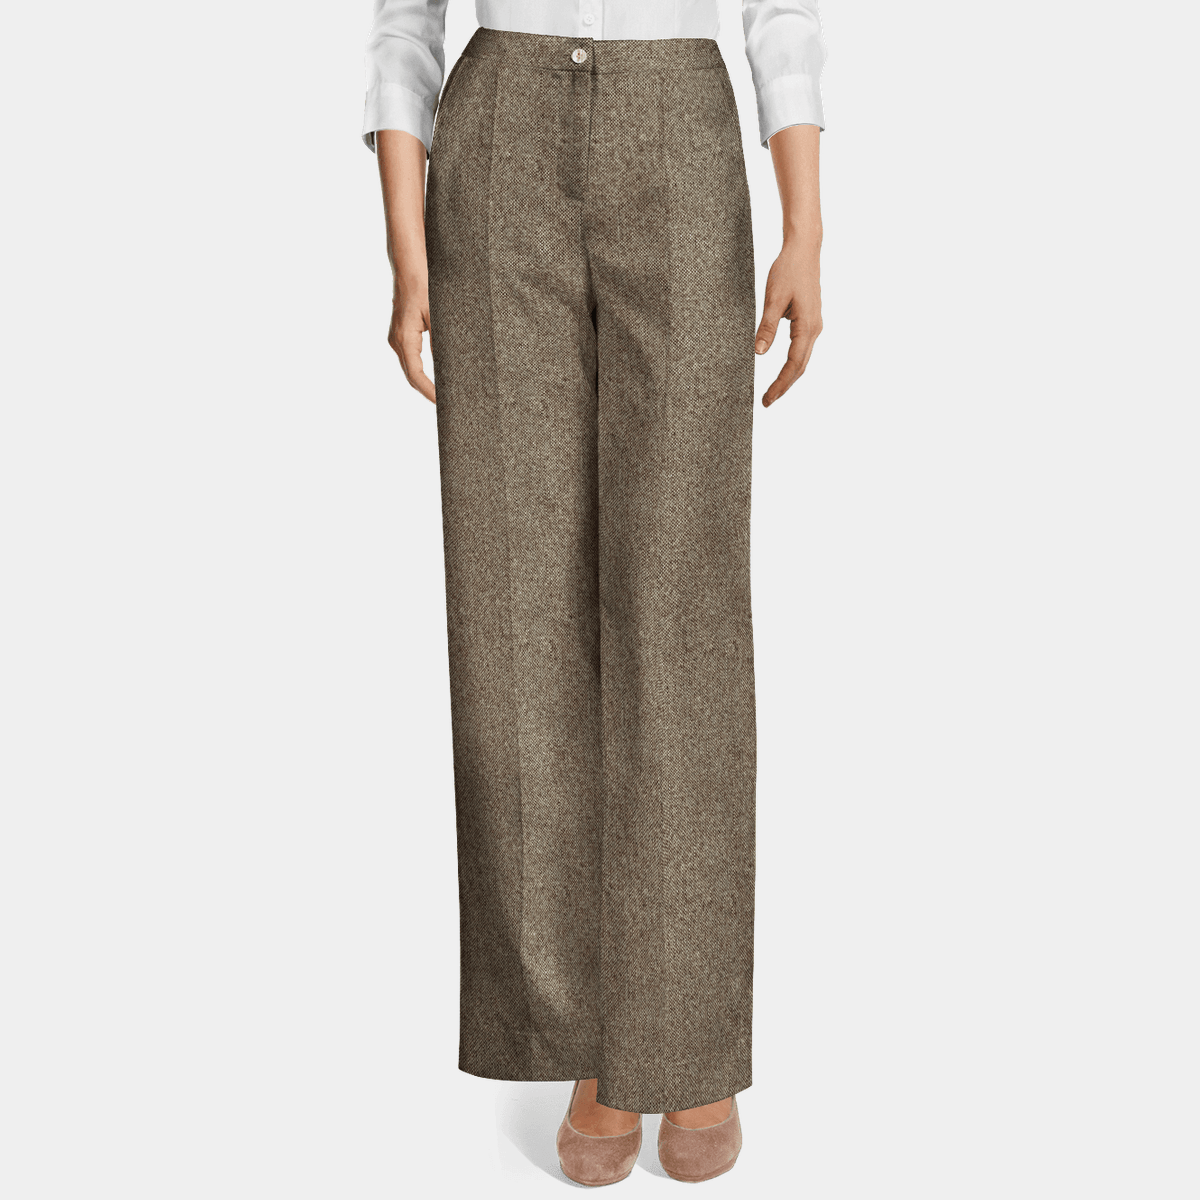 Light brown donegal tweed high waisted flat-front Wide leg Pants